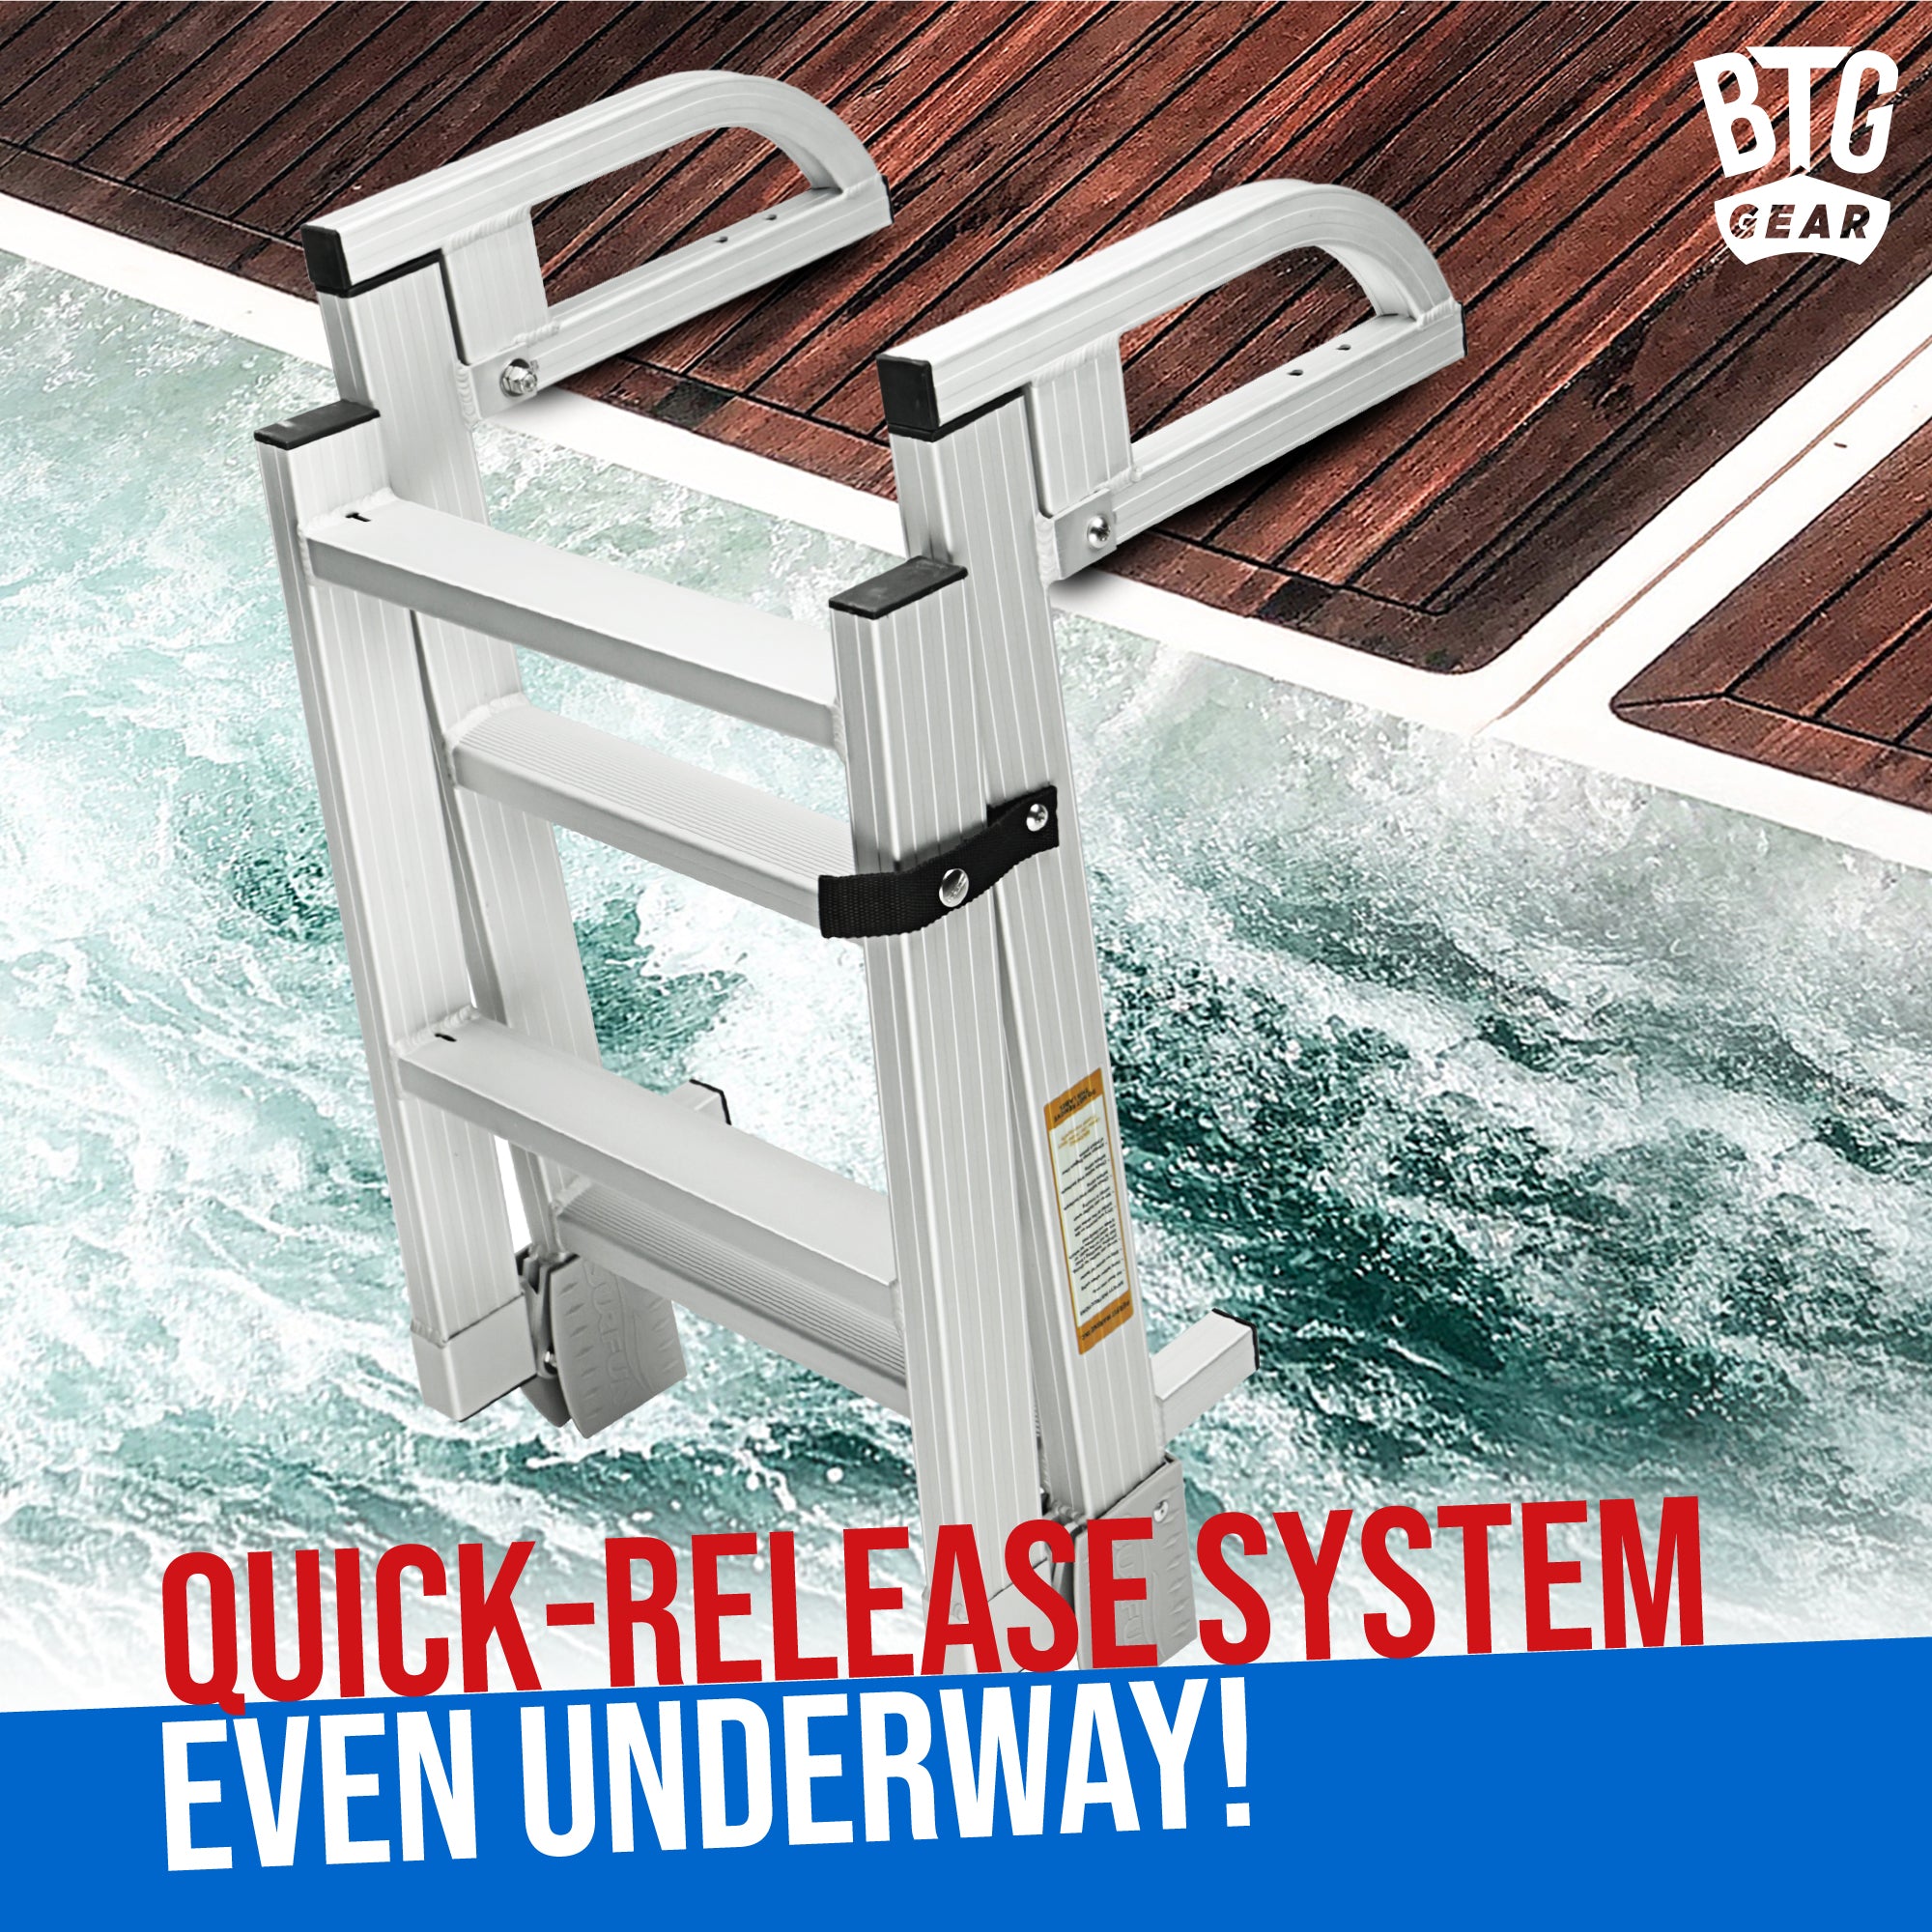 BTG Gear 4-Step Heavy-Duty Pontoon Boat Boarding Marine Folding Ladder, Aluminum w/ Quick Release Clips, extends up to 42